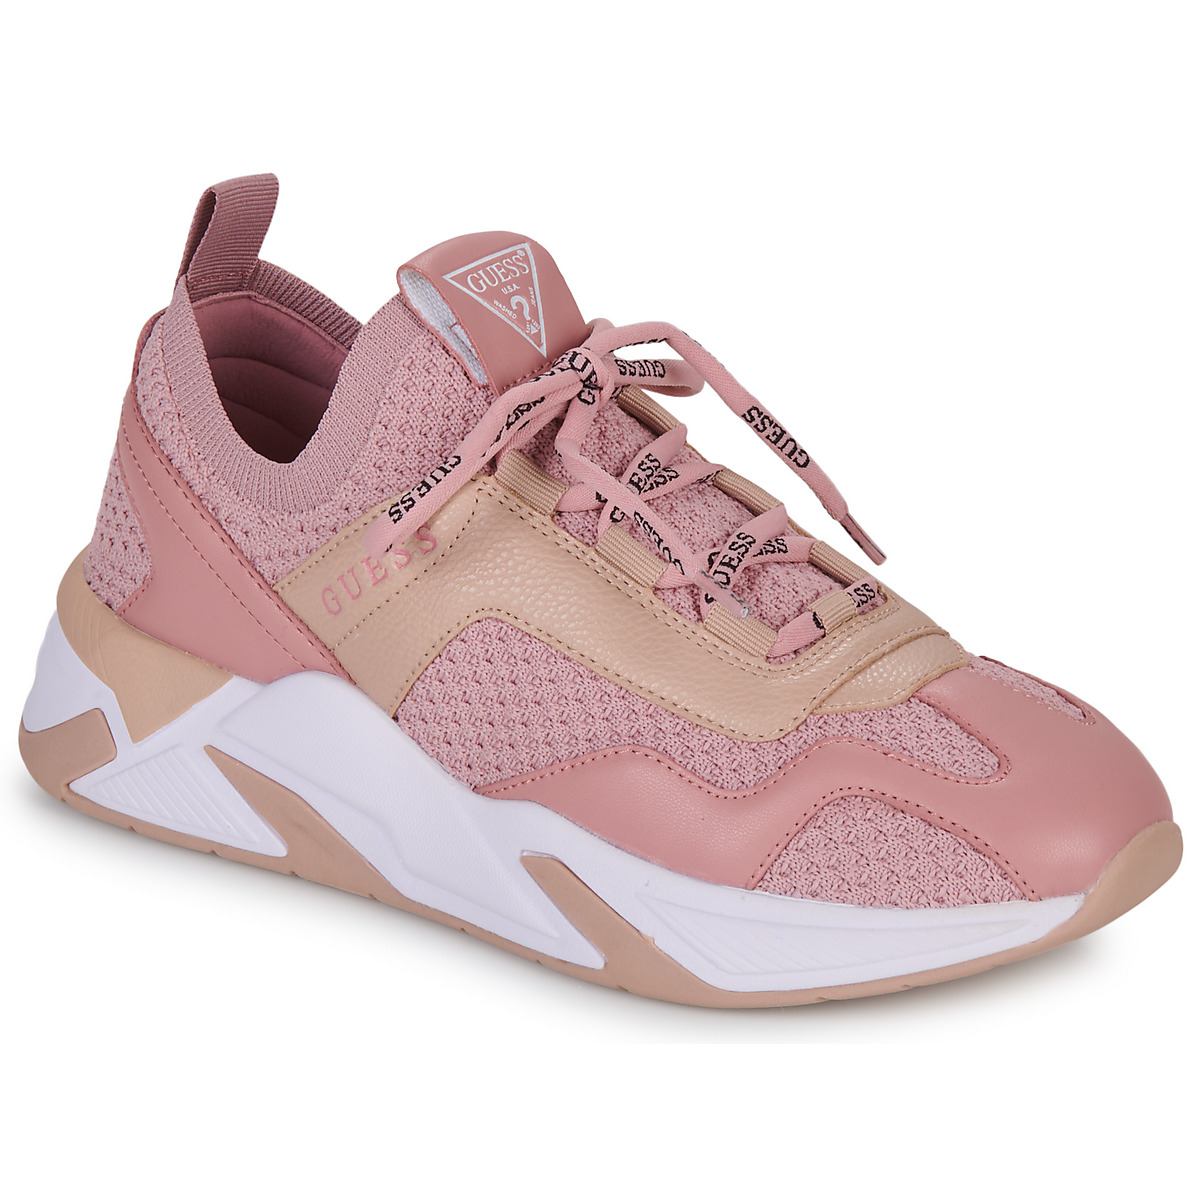 Chaussures Femme Baskets basses Guess GENIVER Rose